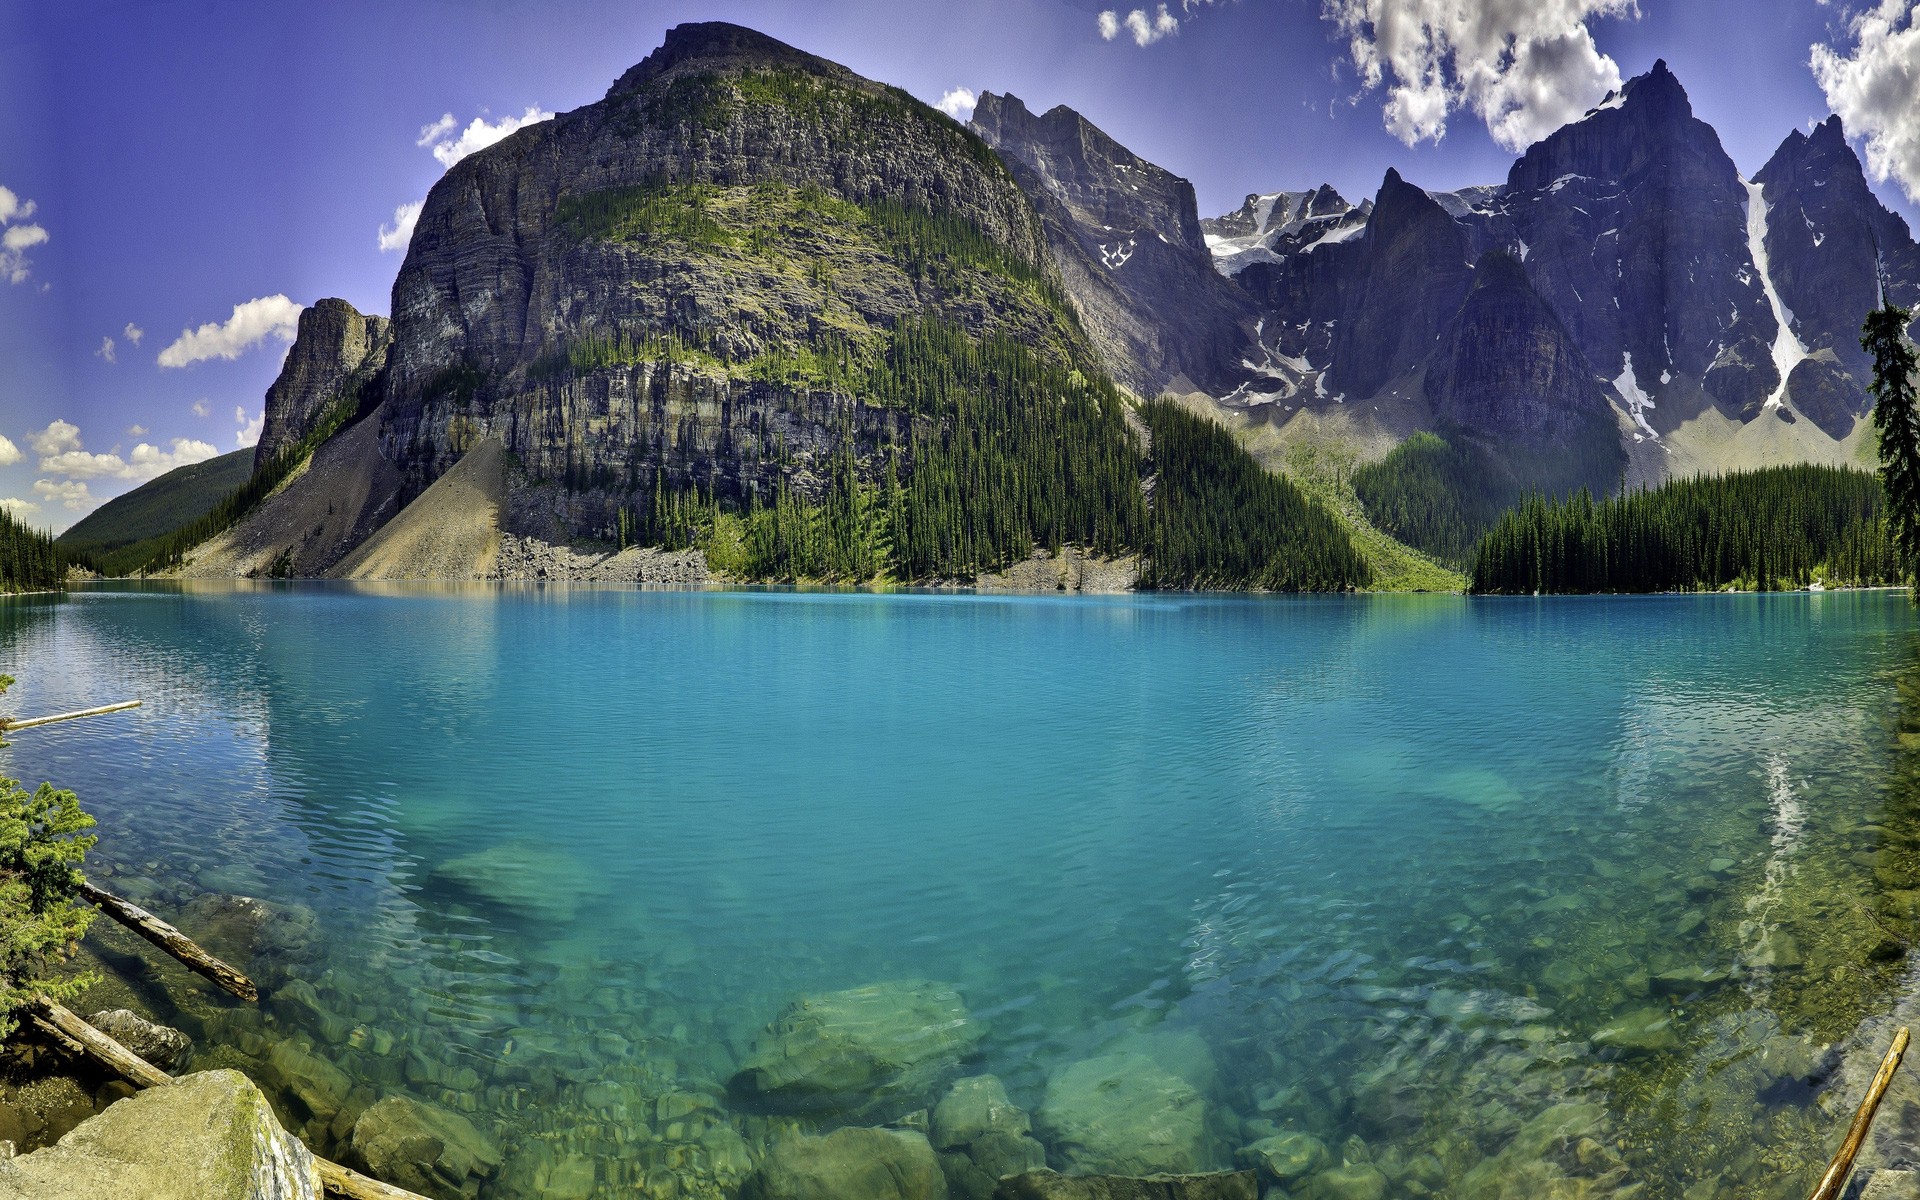 Transparent lake by the mountain